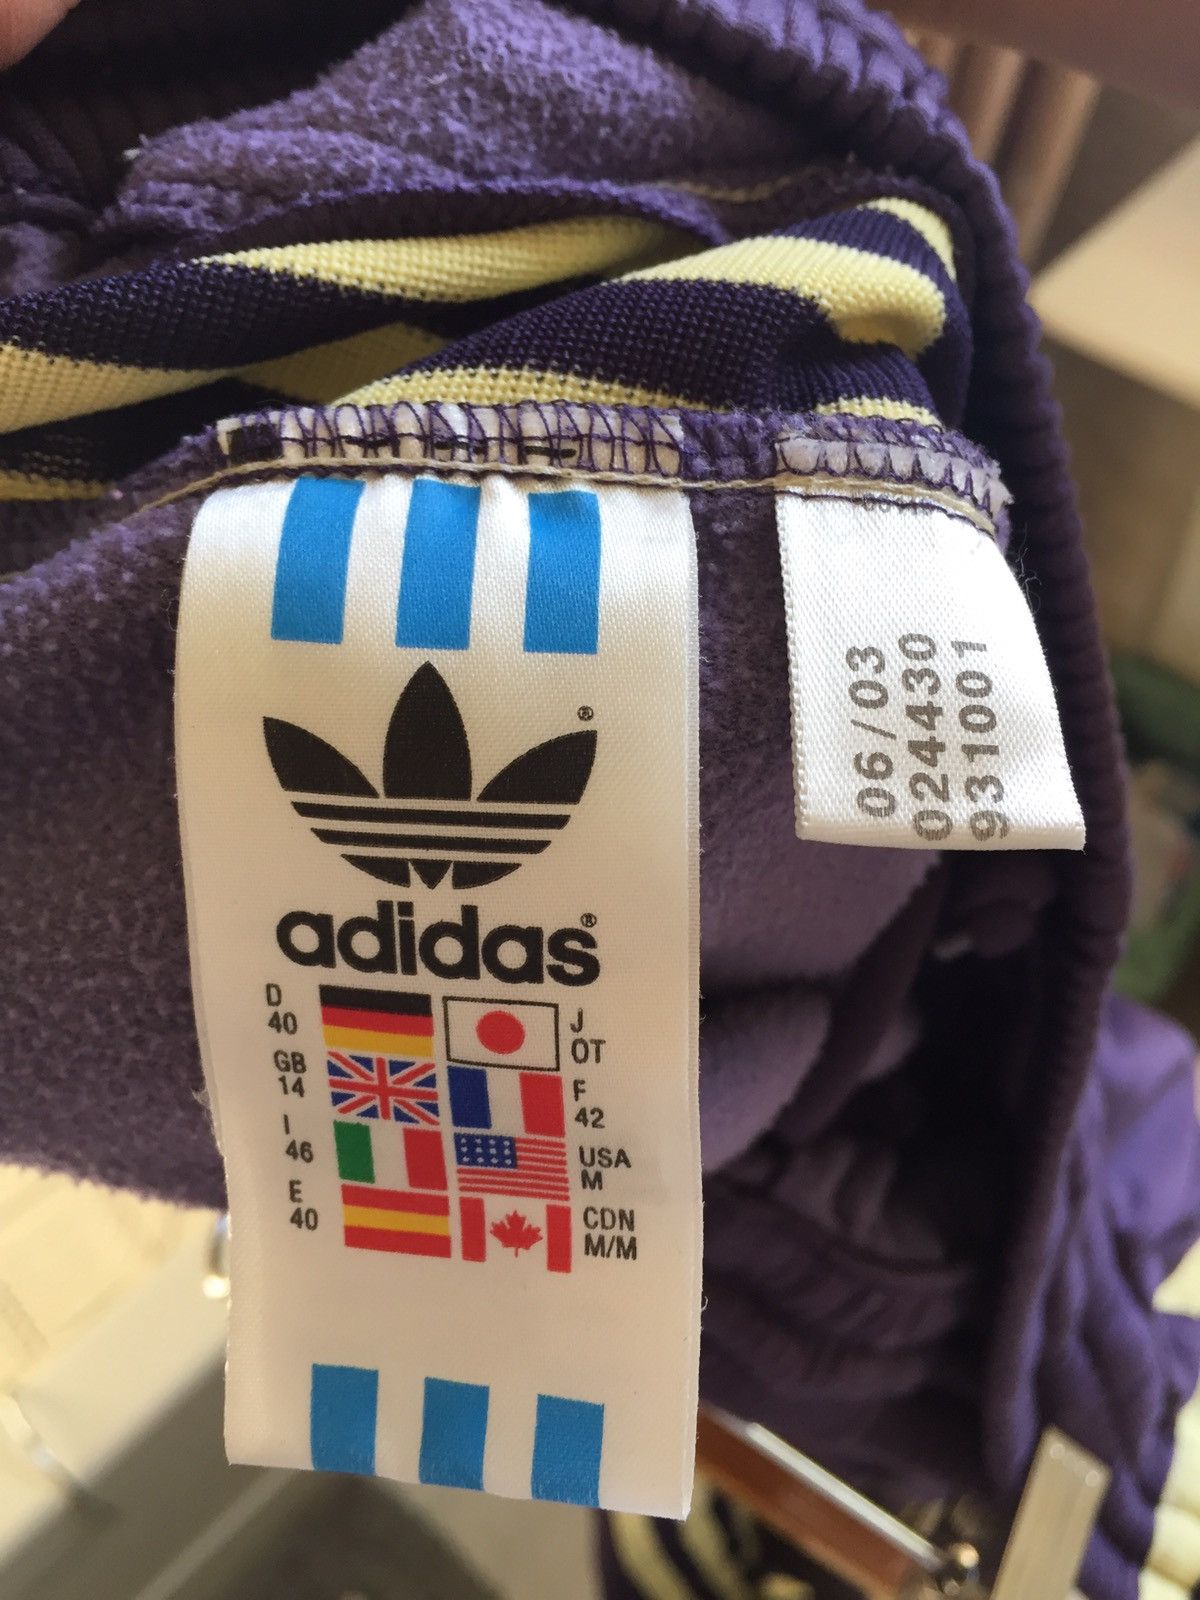 Adidas Pleated Track Pants Size US 32 / EU 48 - 7 Preview